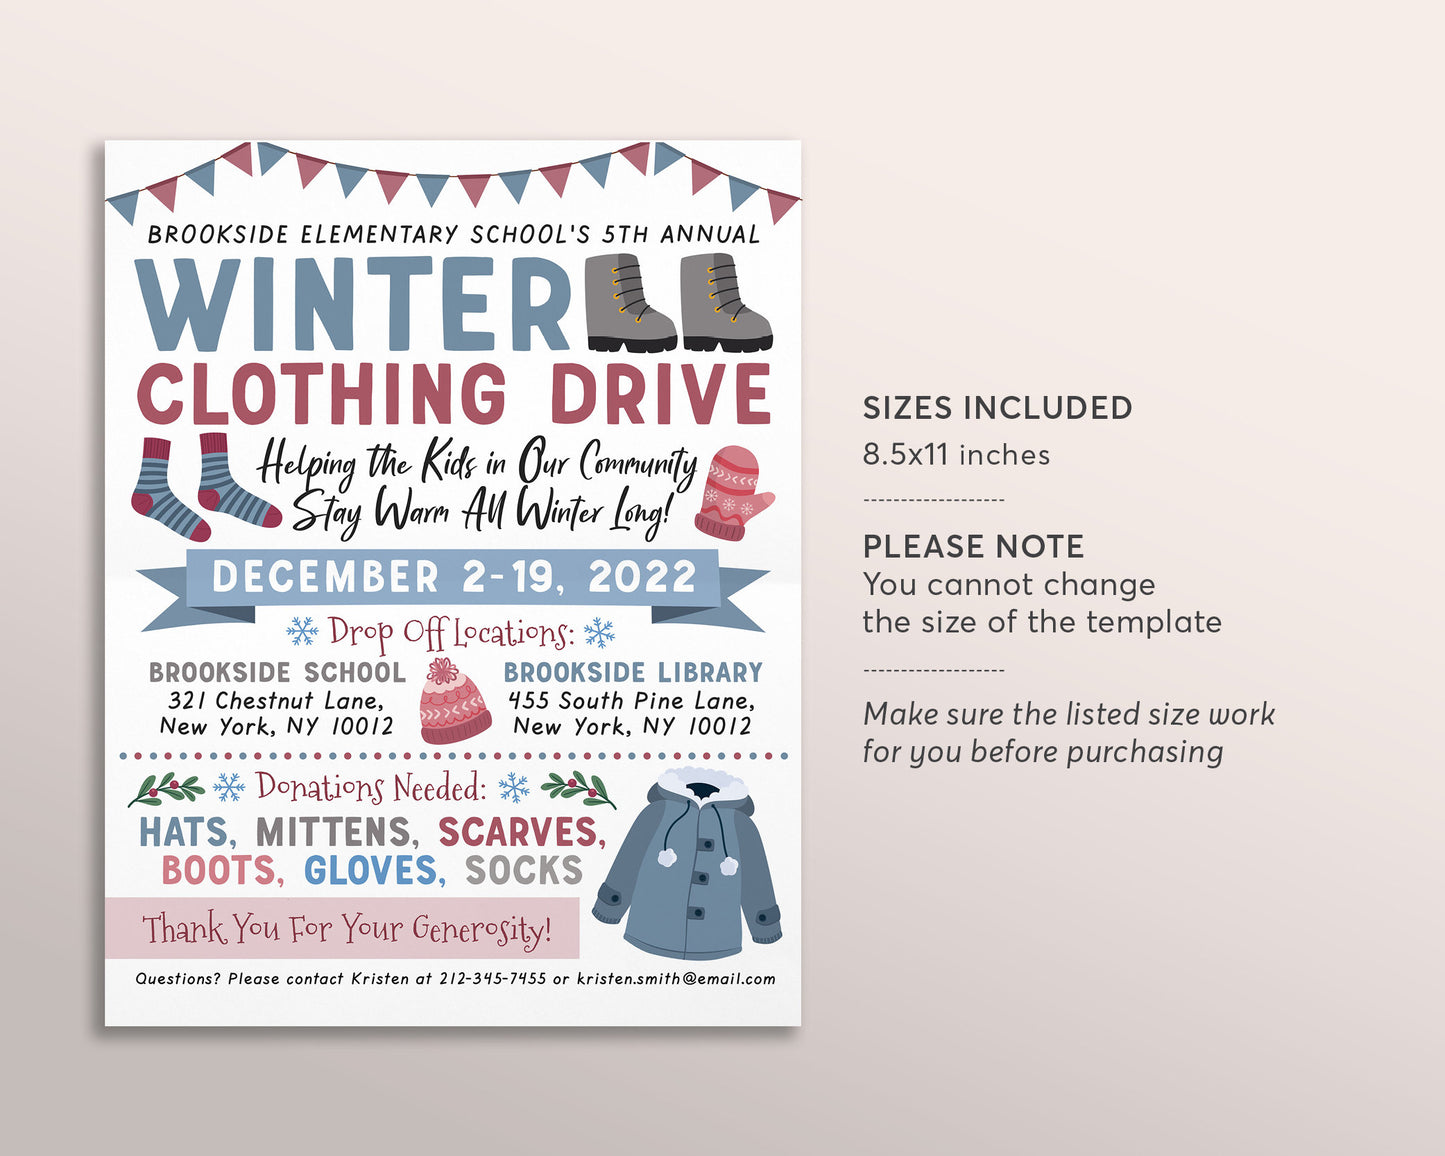 Winter Clothing Drive Flyer Editable Template, Charity Church Fundraiser Printable PTA PTO, Christmas Cold Coat Jacket Donations Flyer